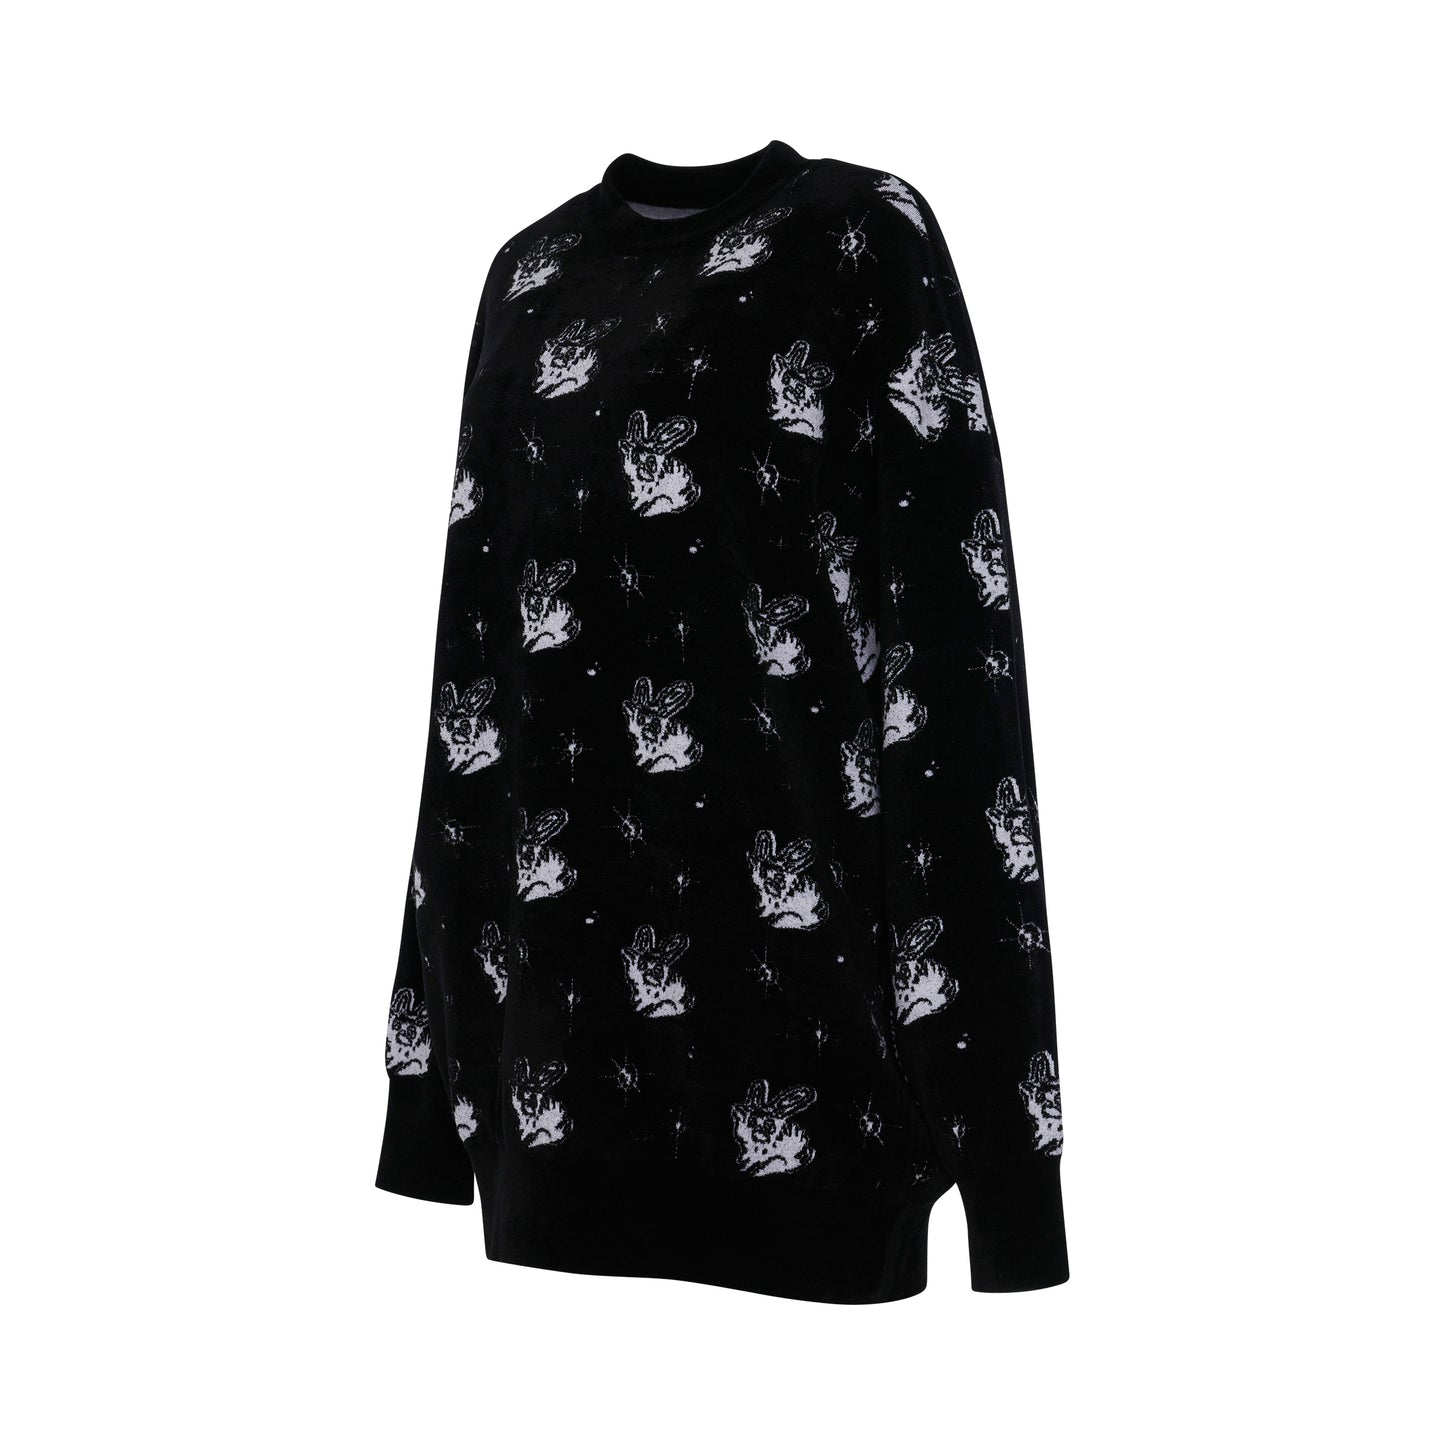 All Over Monster Knit Sweater in Black